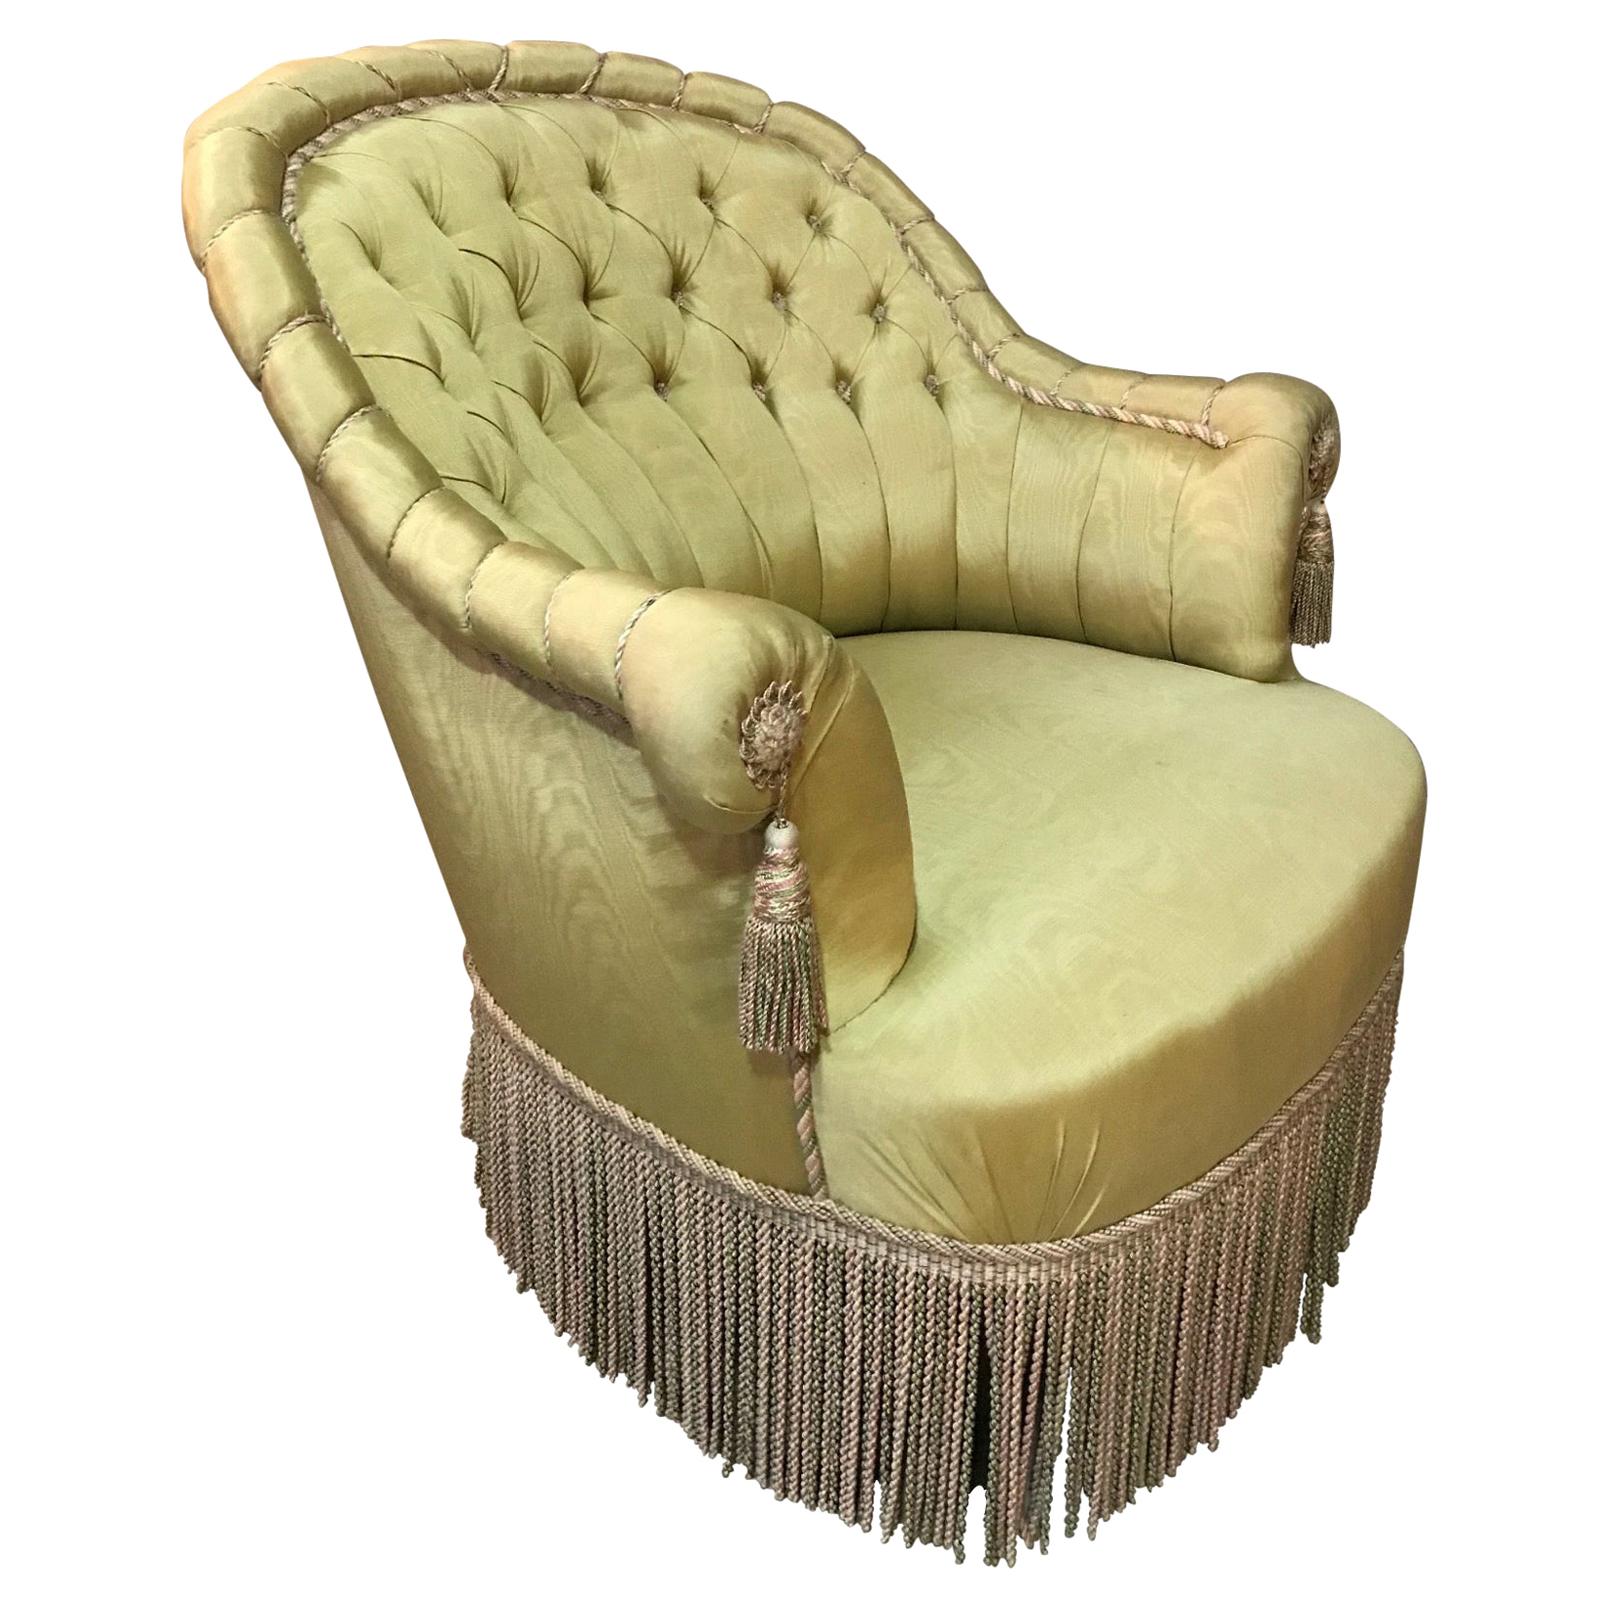 20th Century French Green Moire Fabric Crapaud Armchair, 1940s